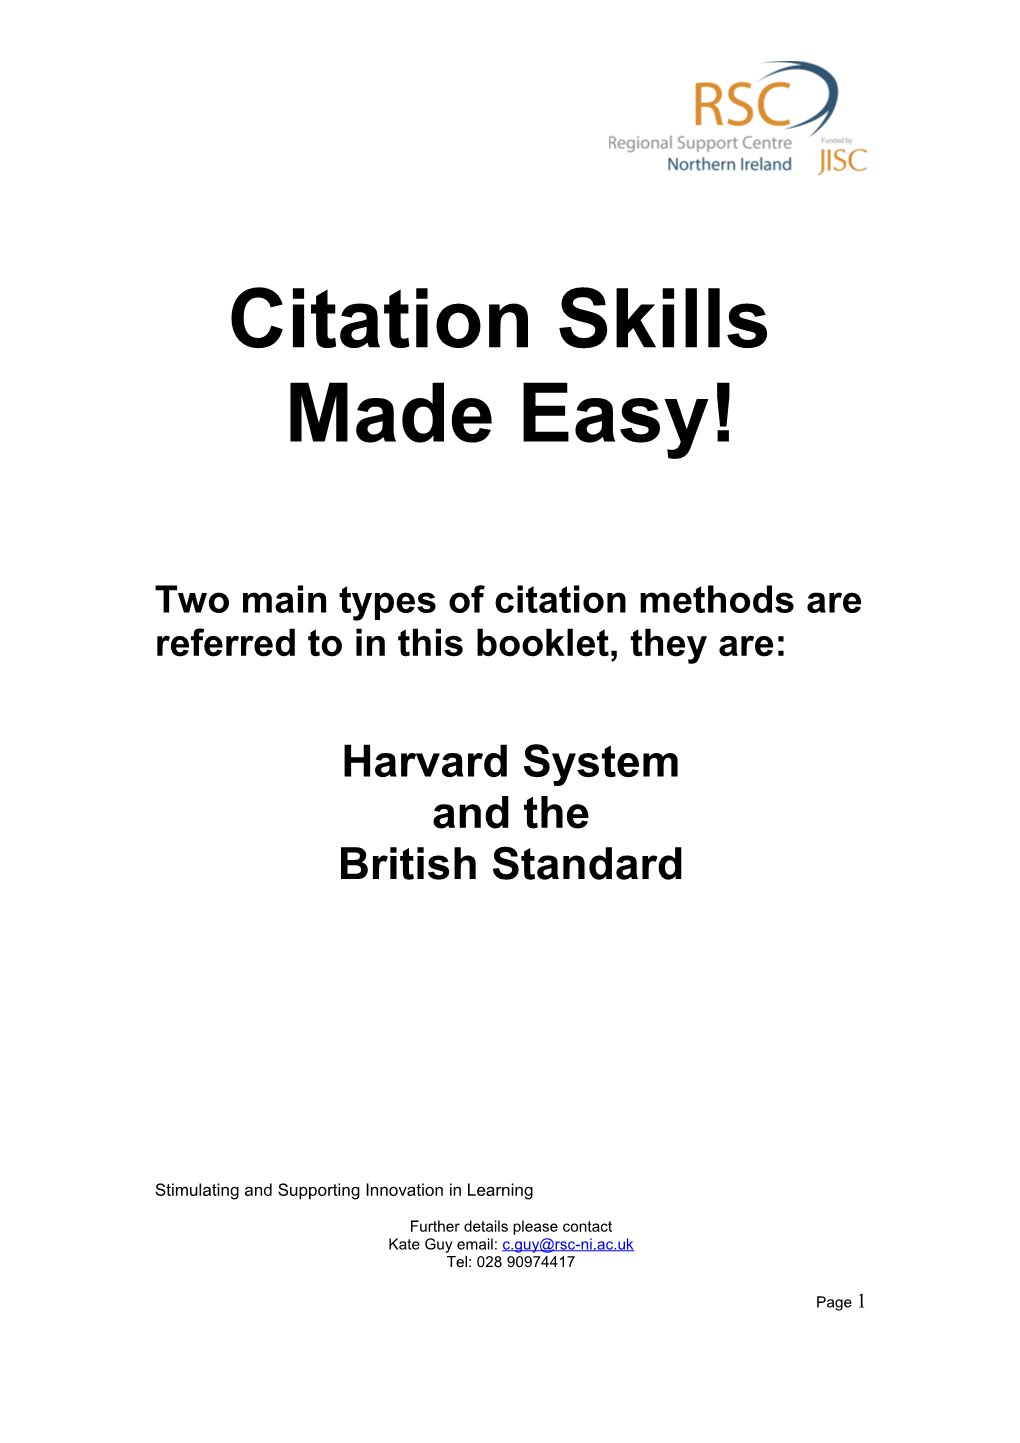 Two Main Types of Citation Methods Are Referred to in This Booklet, They Are